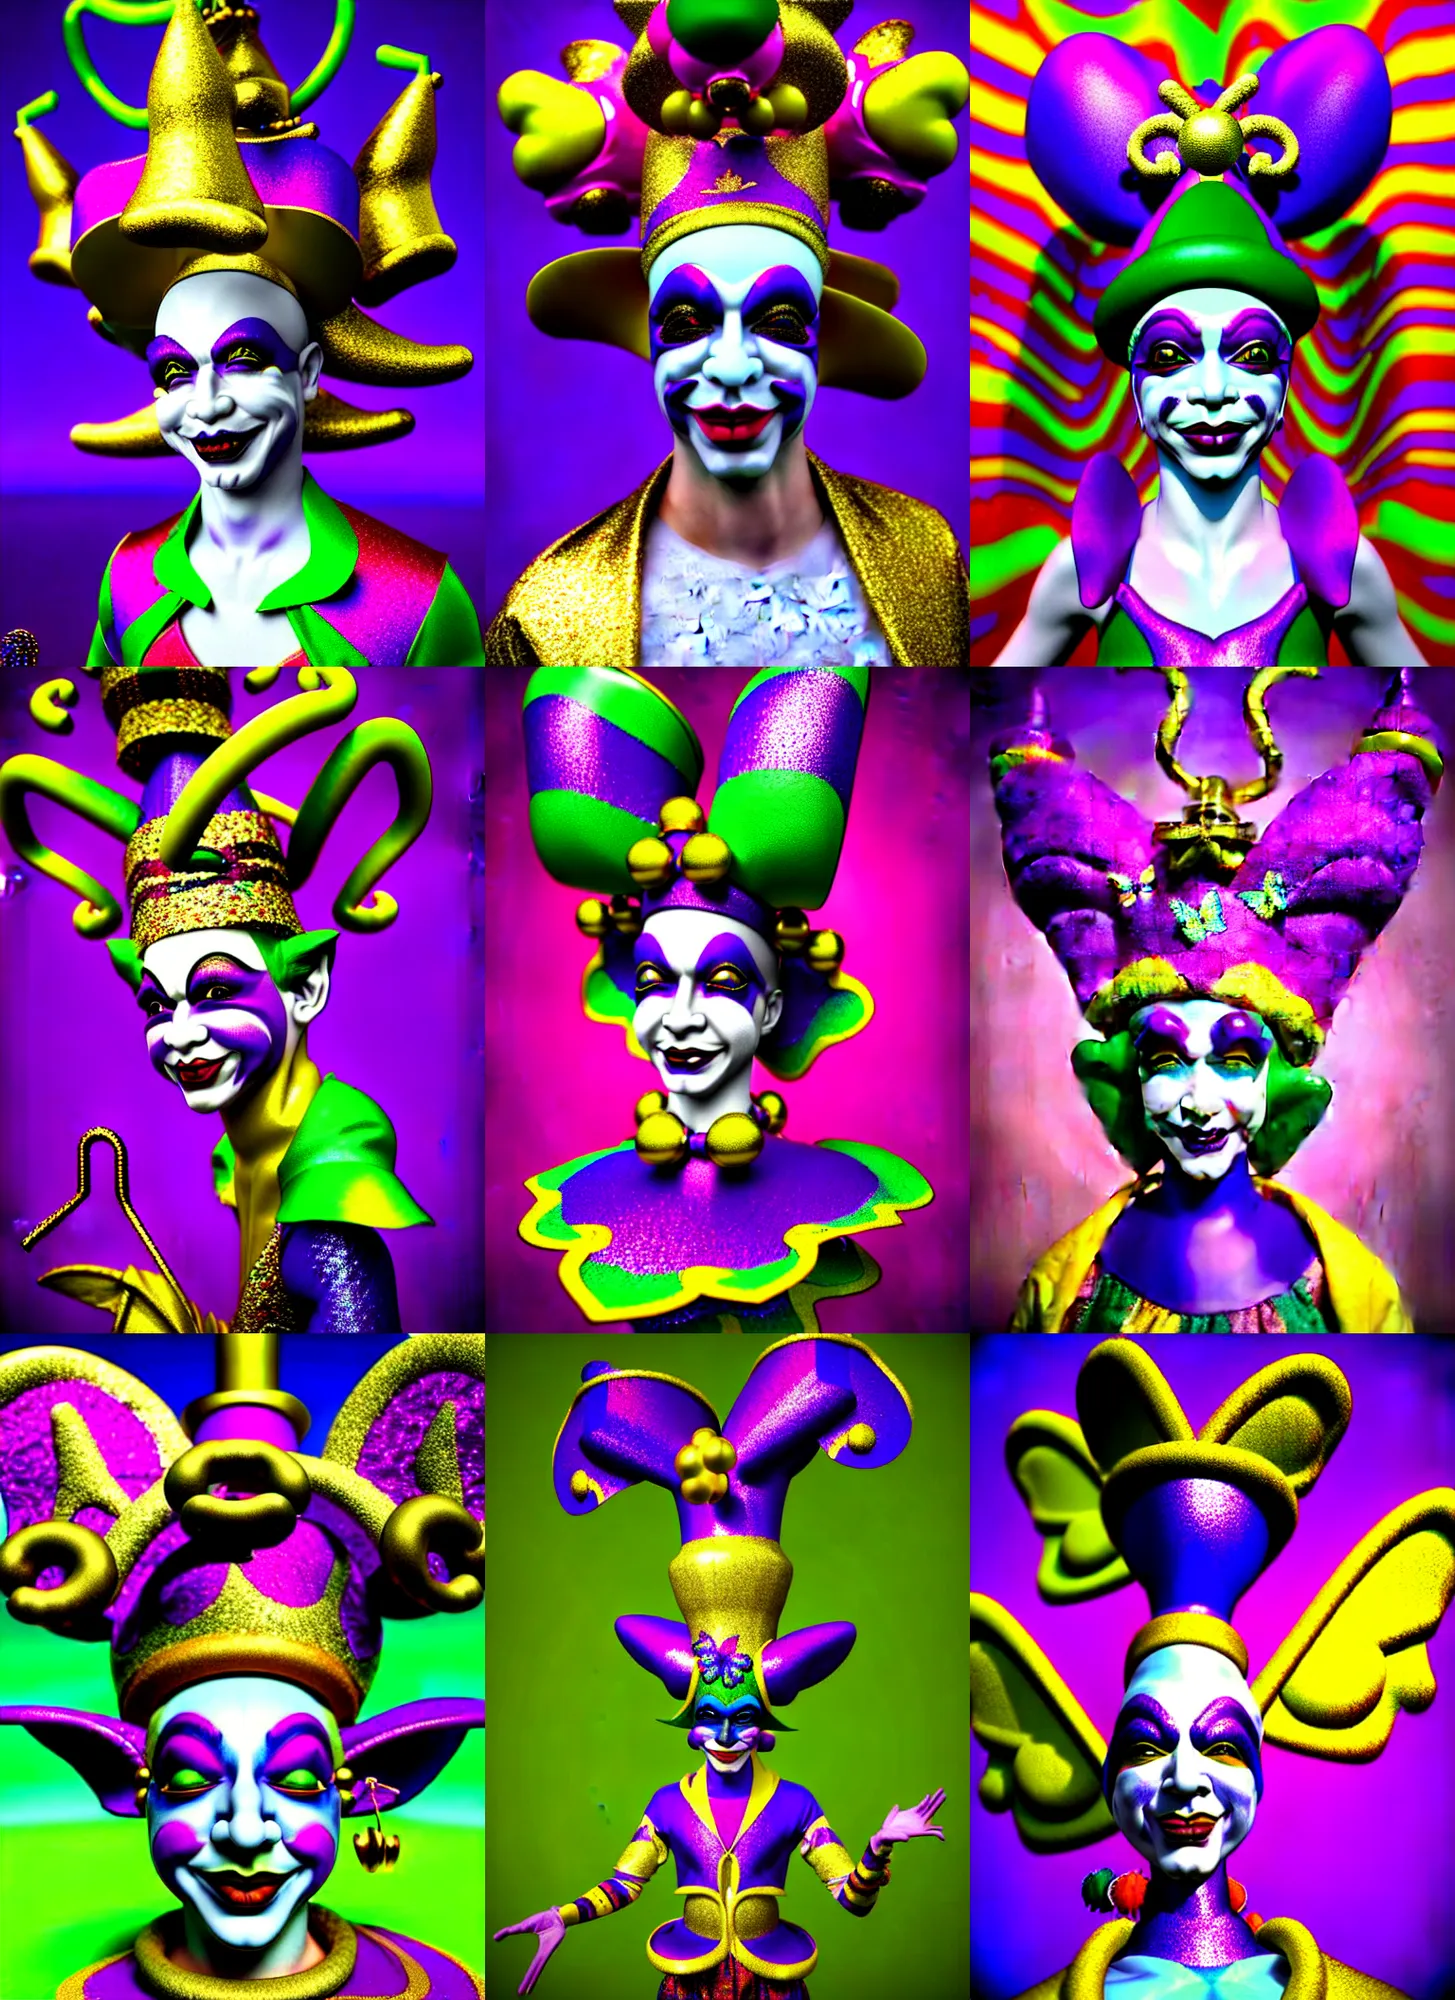 Prompt: 3d render of mardi gras jester doll by Ichiro Tanida wearing a jester cap and bells and wearing angel wings against a psychedelic swirly background with 3d butterflies and 3d flowers n the style of 1990's CG graphics 3d rendered y2K aesthetic by Ichiro Tanida, 3DO magazine